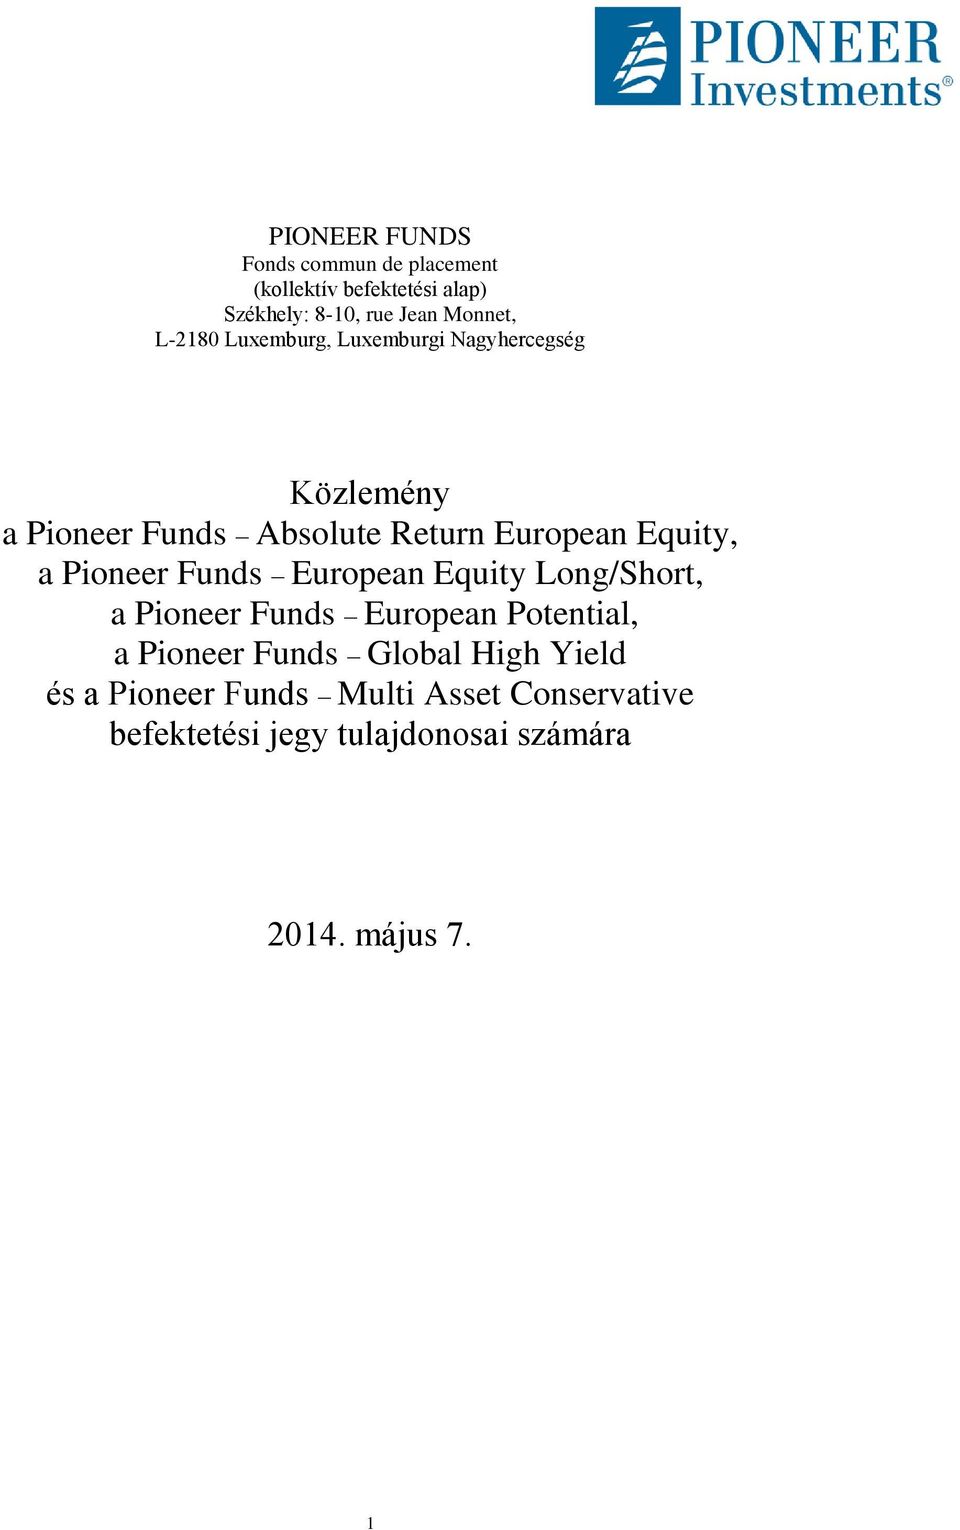 Pioneer Funds European Equity Long/Short, a Pioneer Funds European Potential, a Pioneer Funds Global